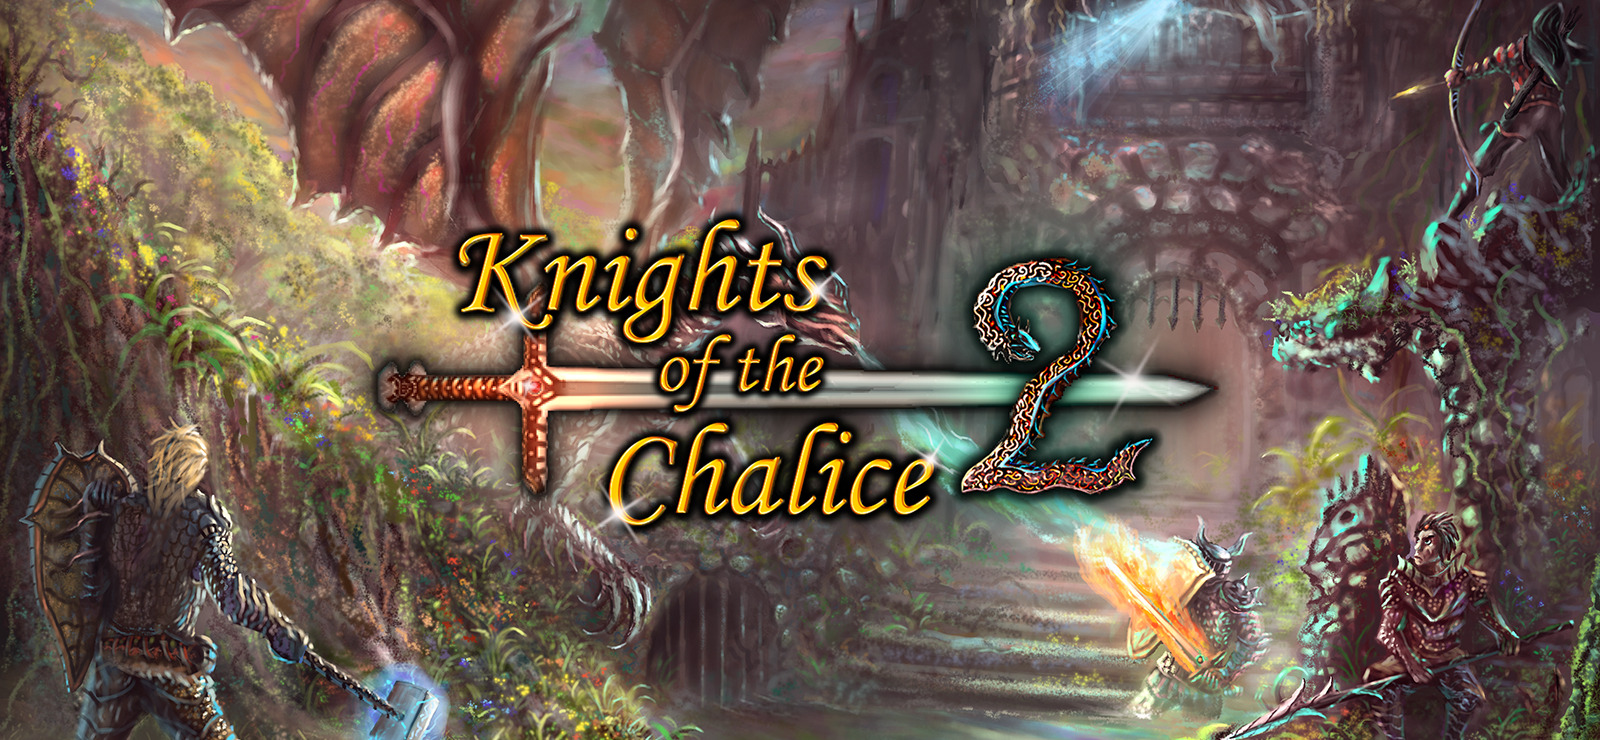 Download Knights Of The Chalice 2 v1.36-GOG